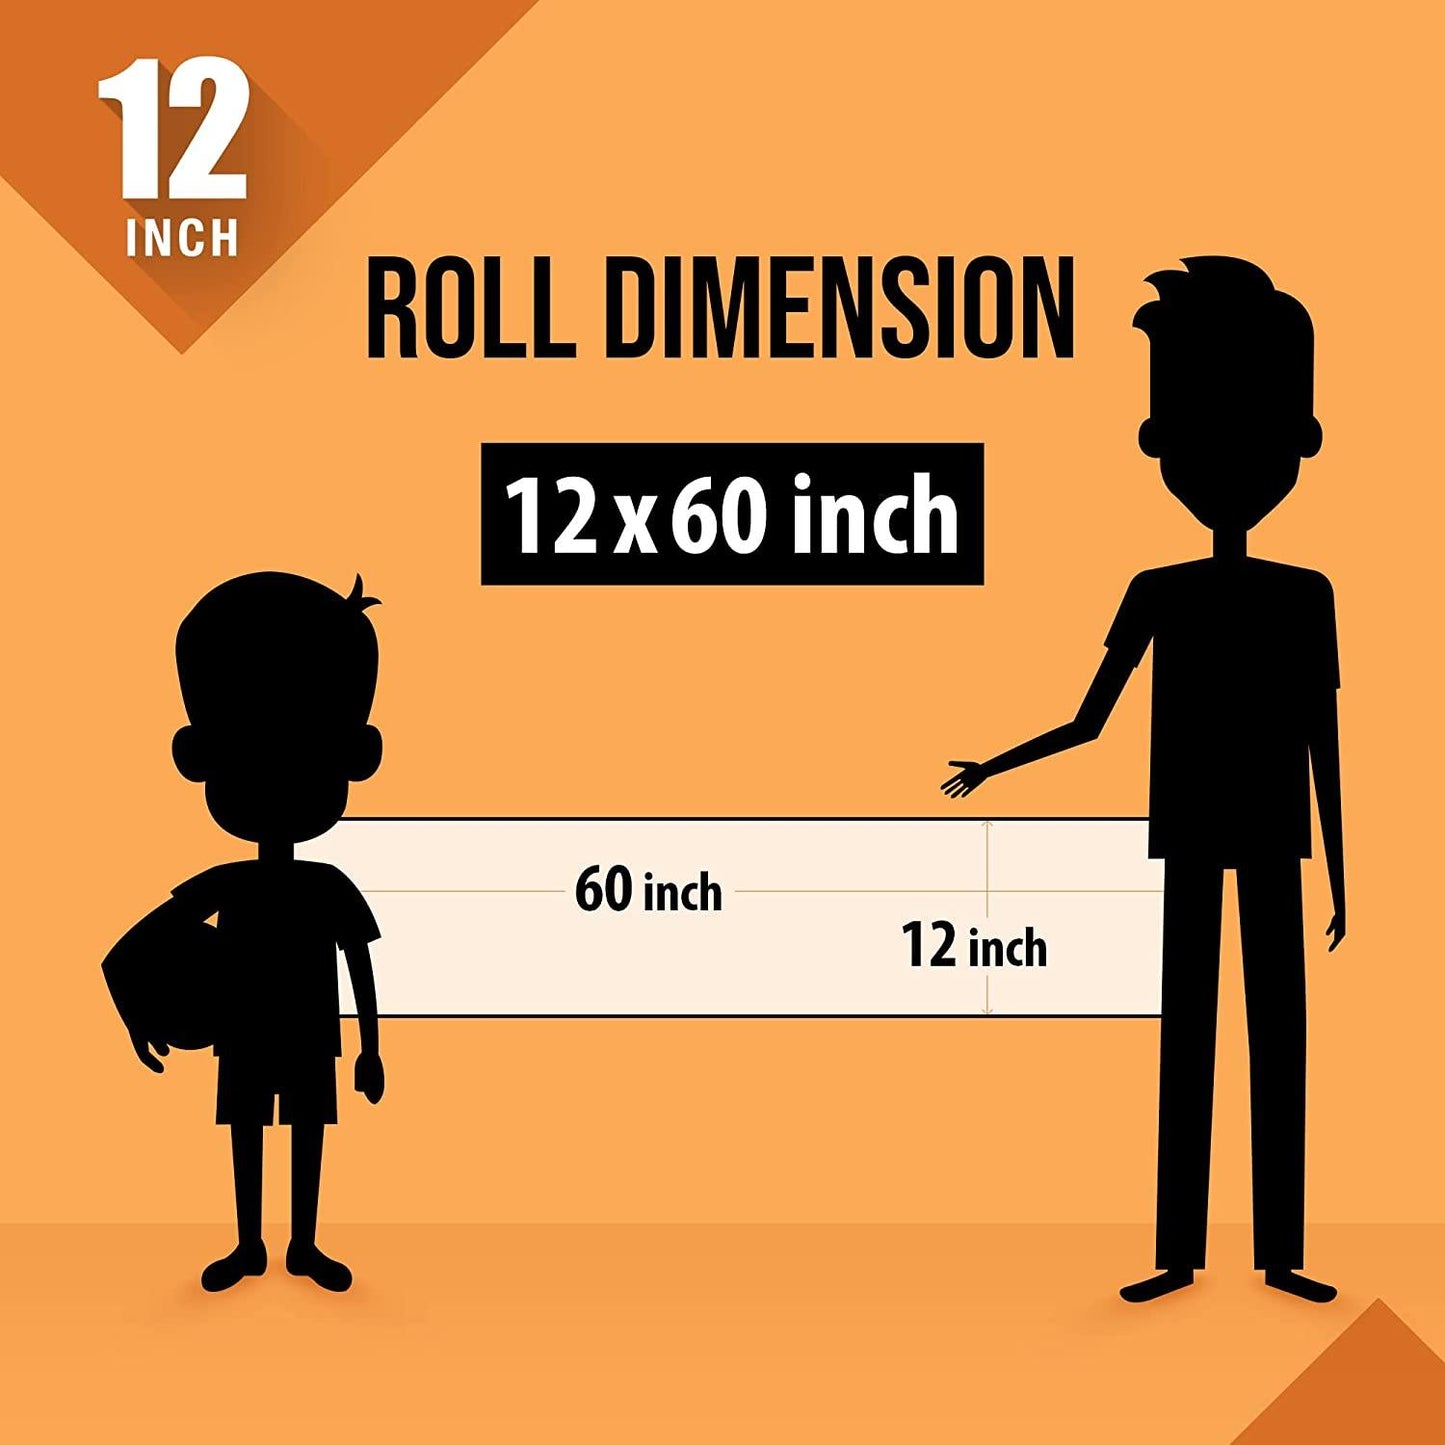 The image shows an orange background with a ruler indicating child and adult height on an 12*54 inch paper roll dimension.